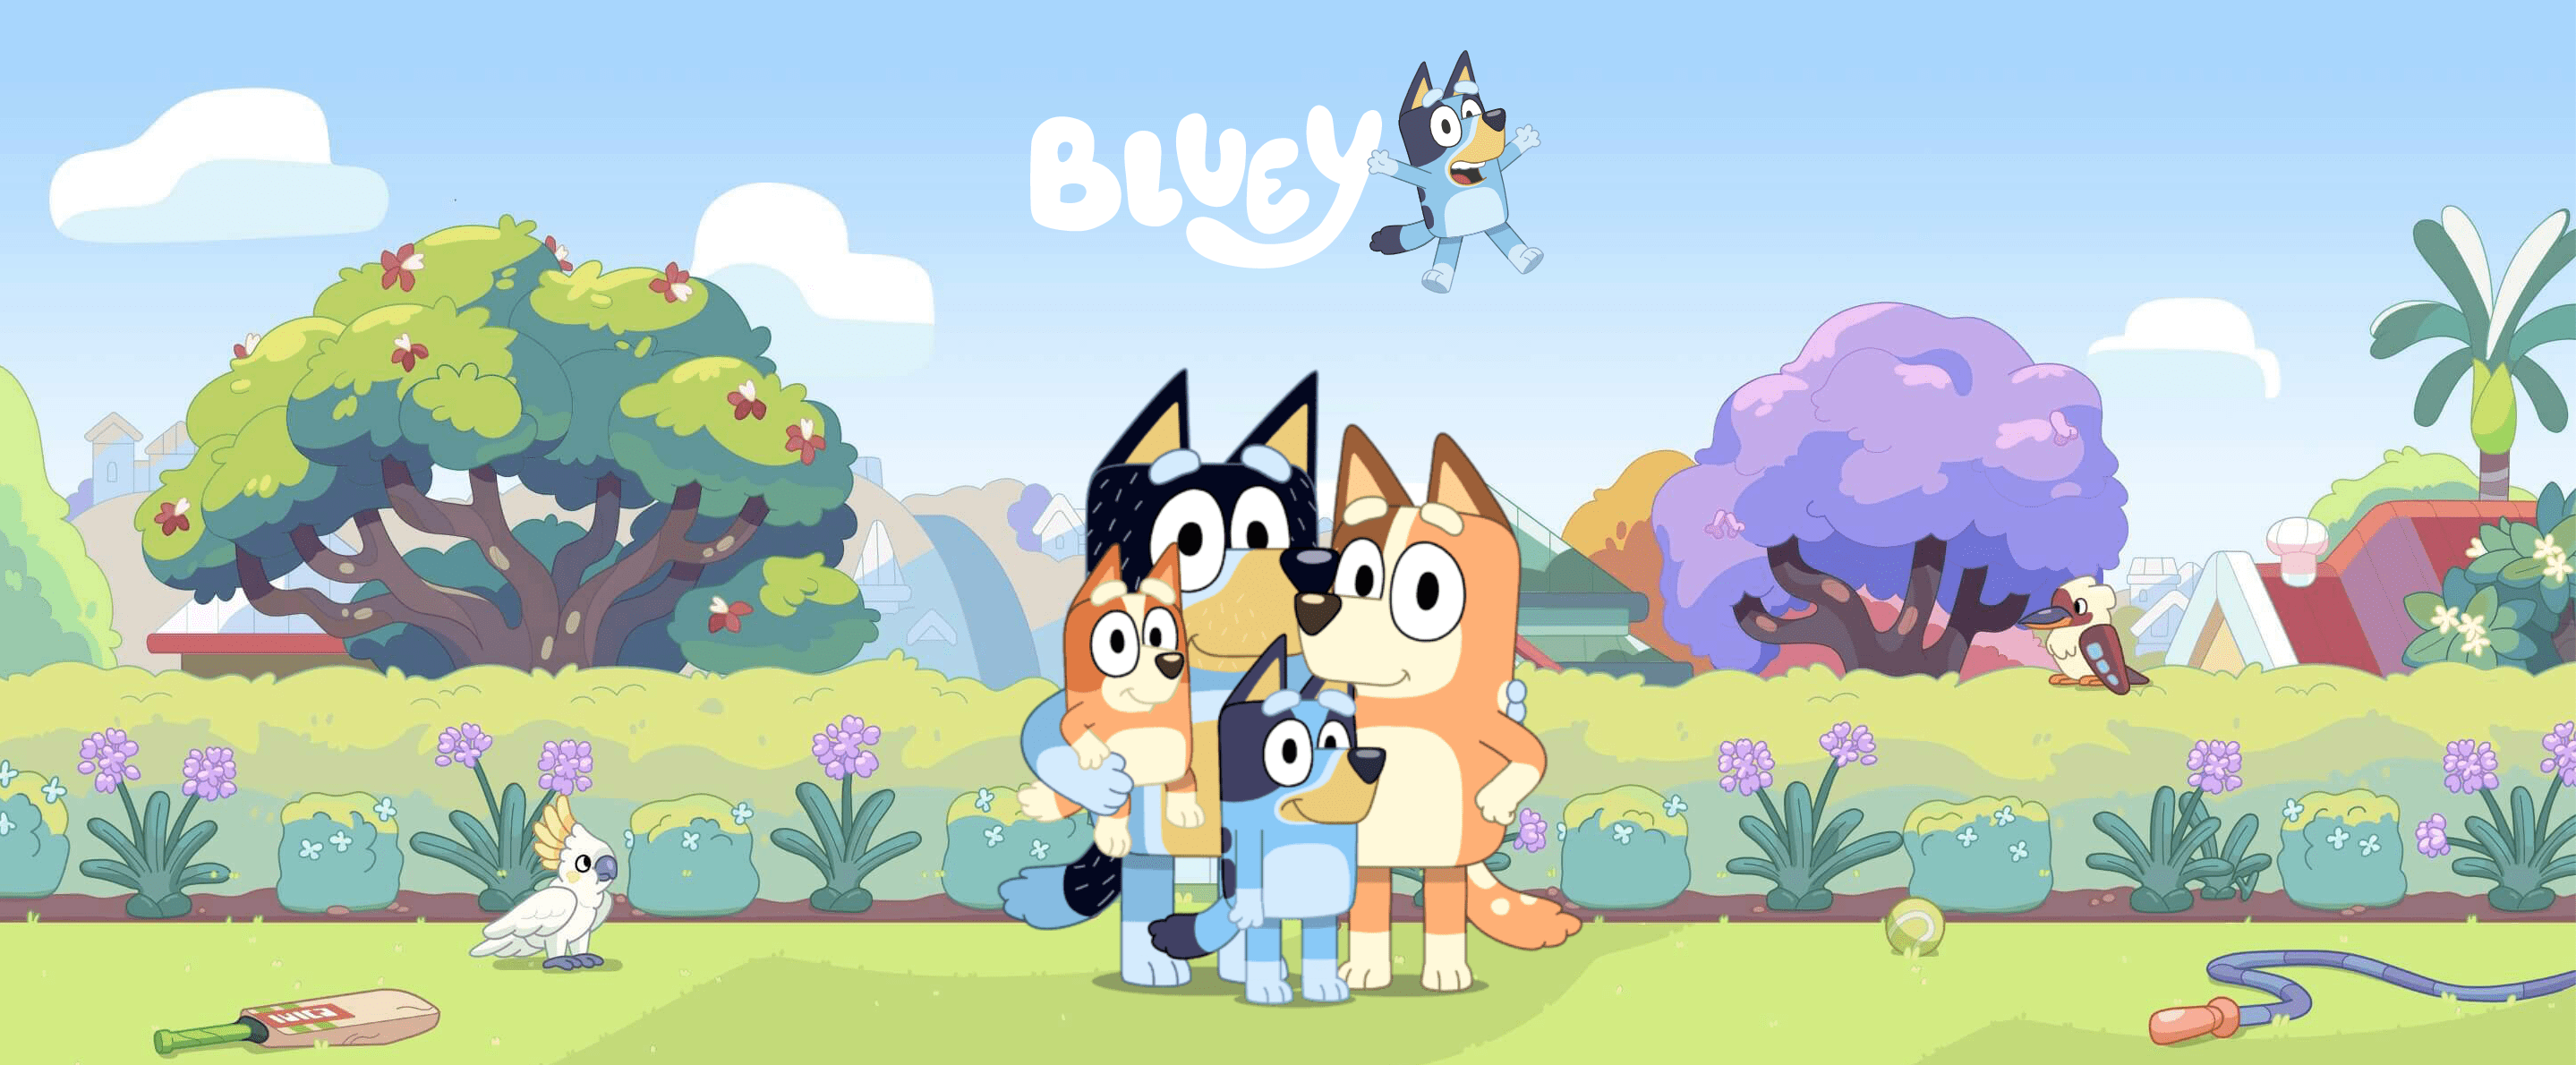 Cartoon Catharsis: The 7 Bluey Episodes That Make Me Cry